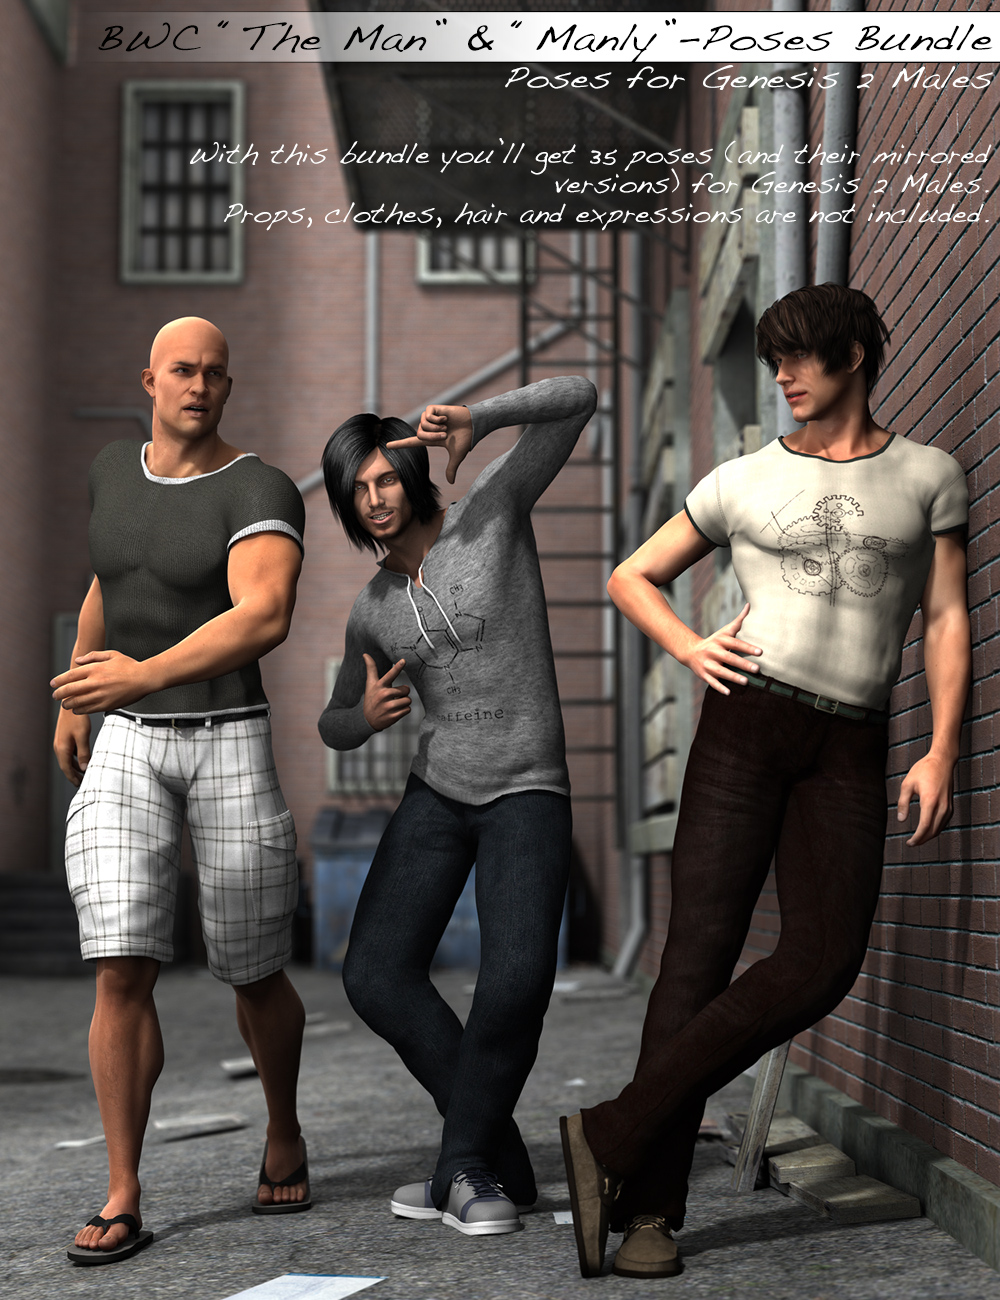 BWC "The Man" and "Manly" - Poses Bundle by: Sedor, 3D Models by Daz 3D